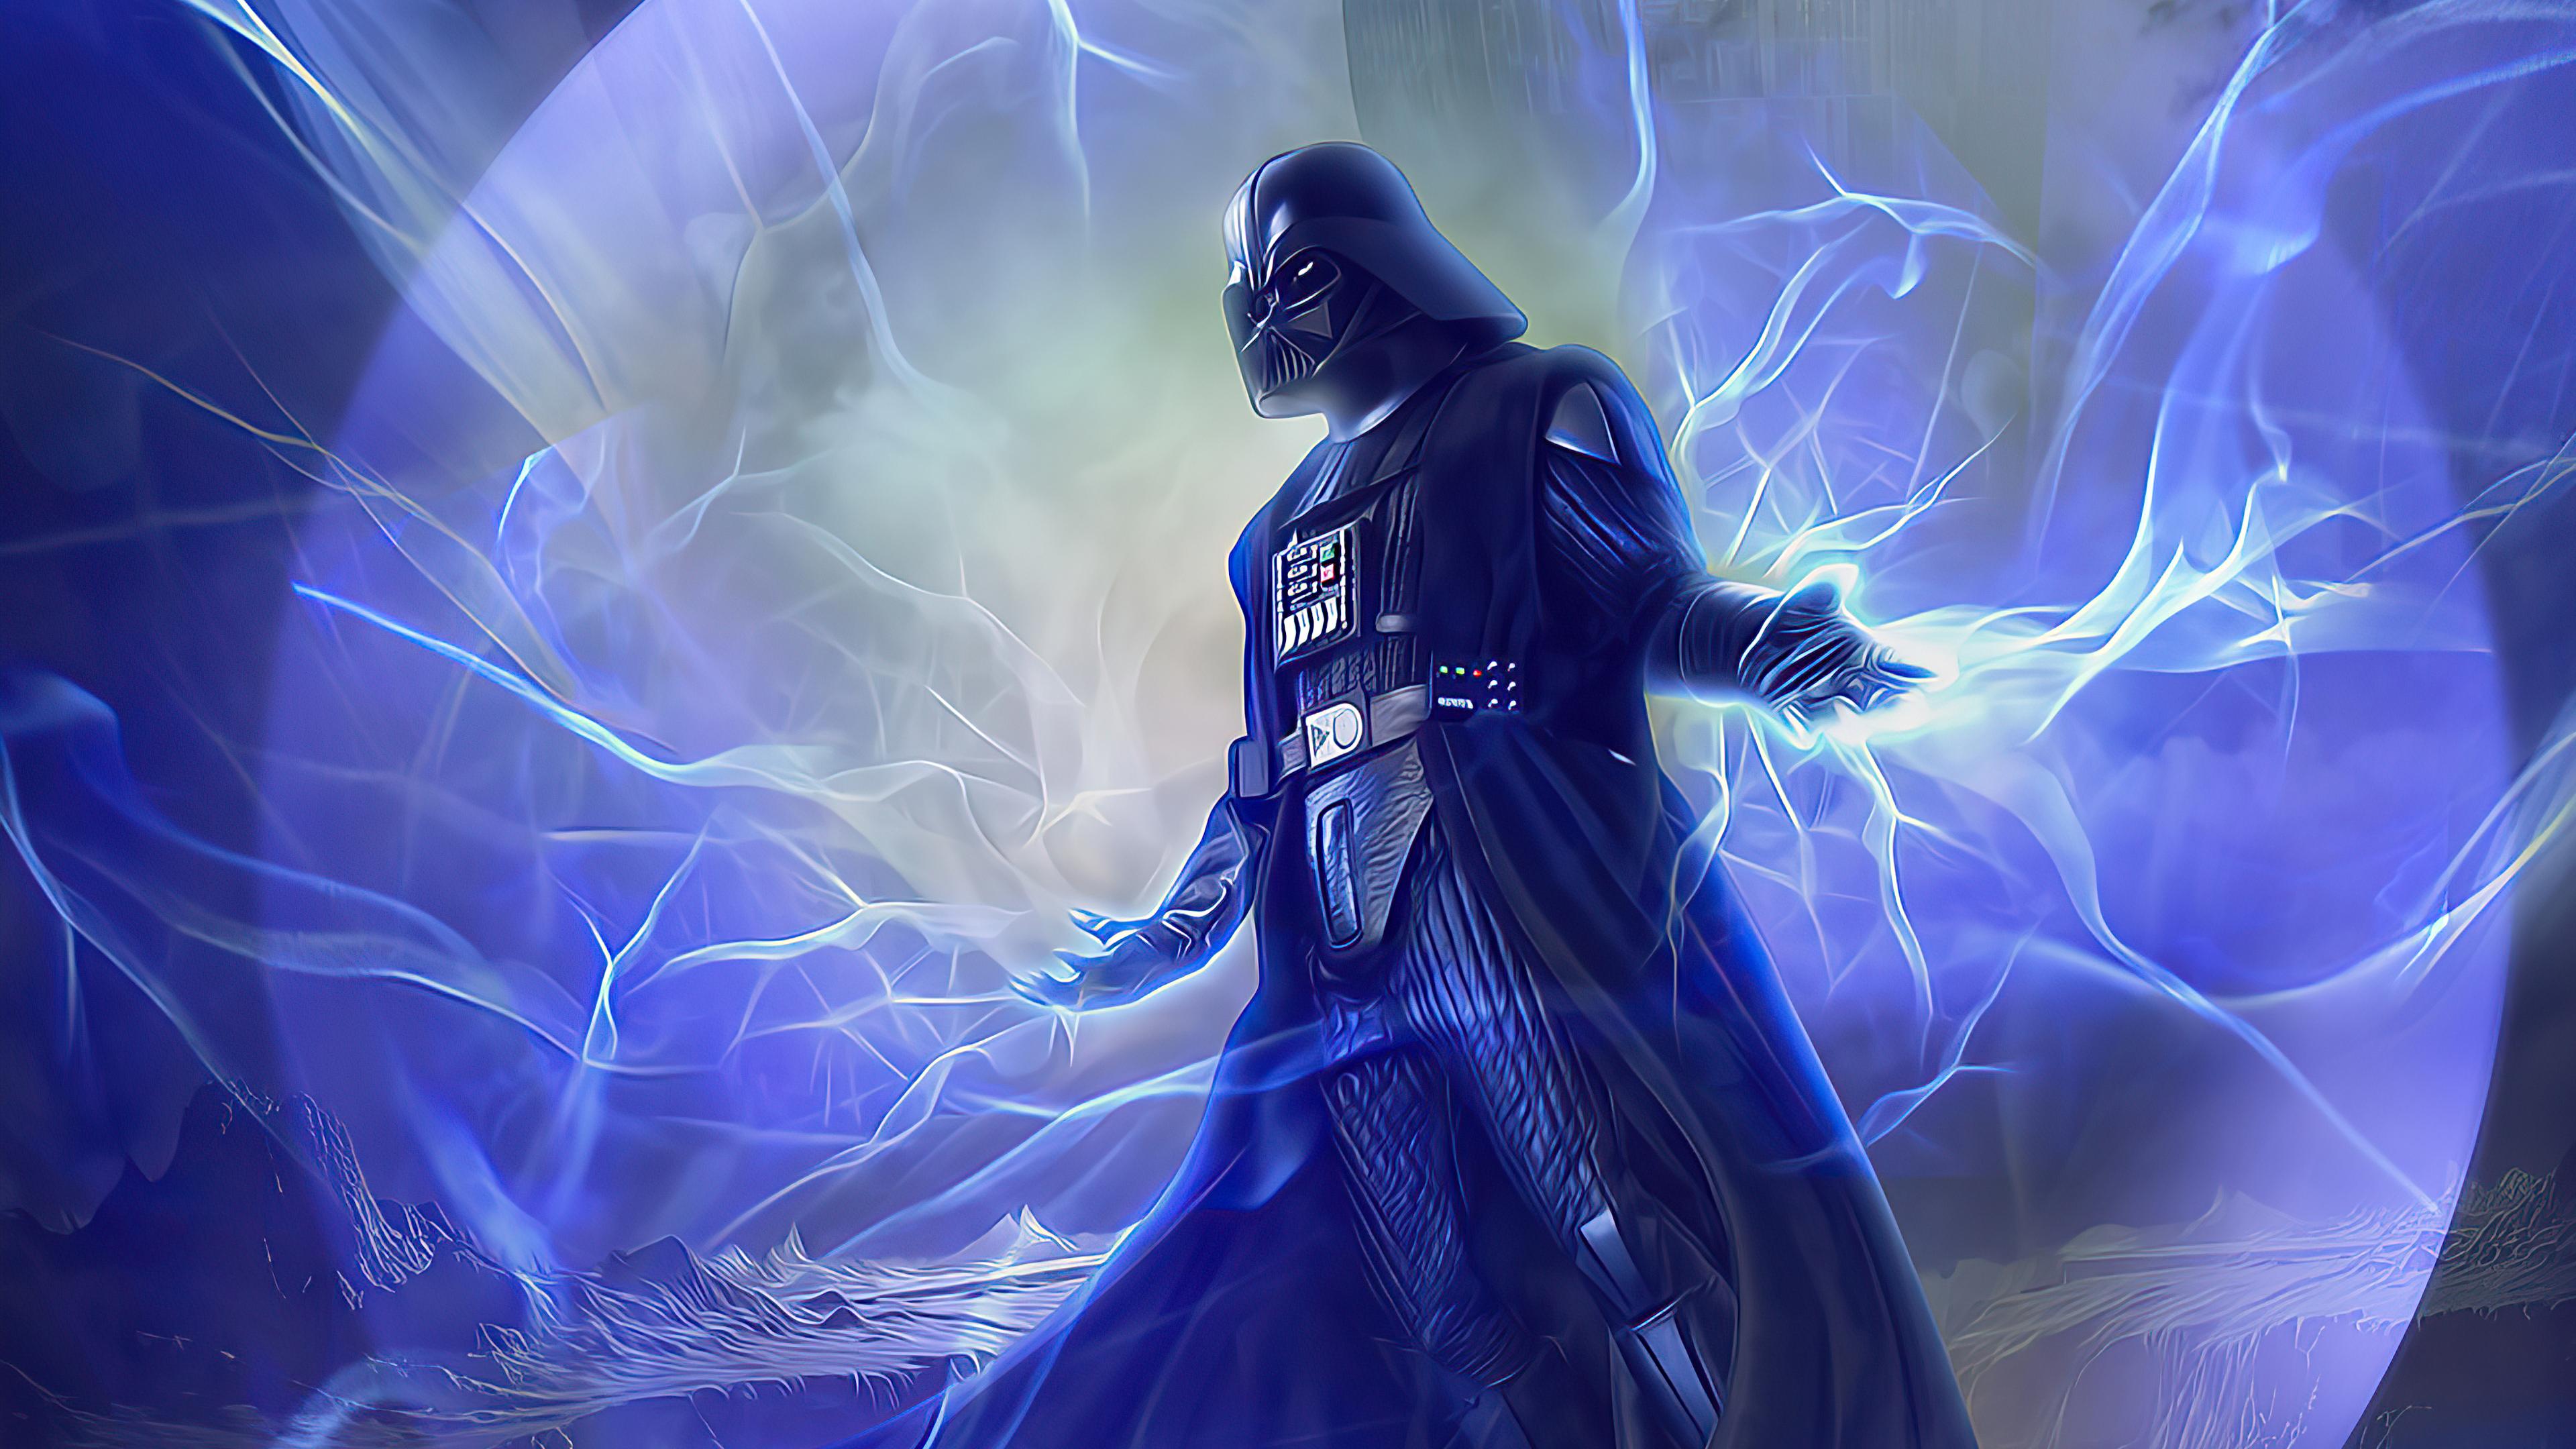 3840 x 2160 · jpeg - Darth Vader 2020 Artwork, HD Movies, 4k Wallpapers, Images, Backgrounds ...